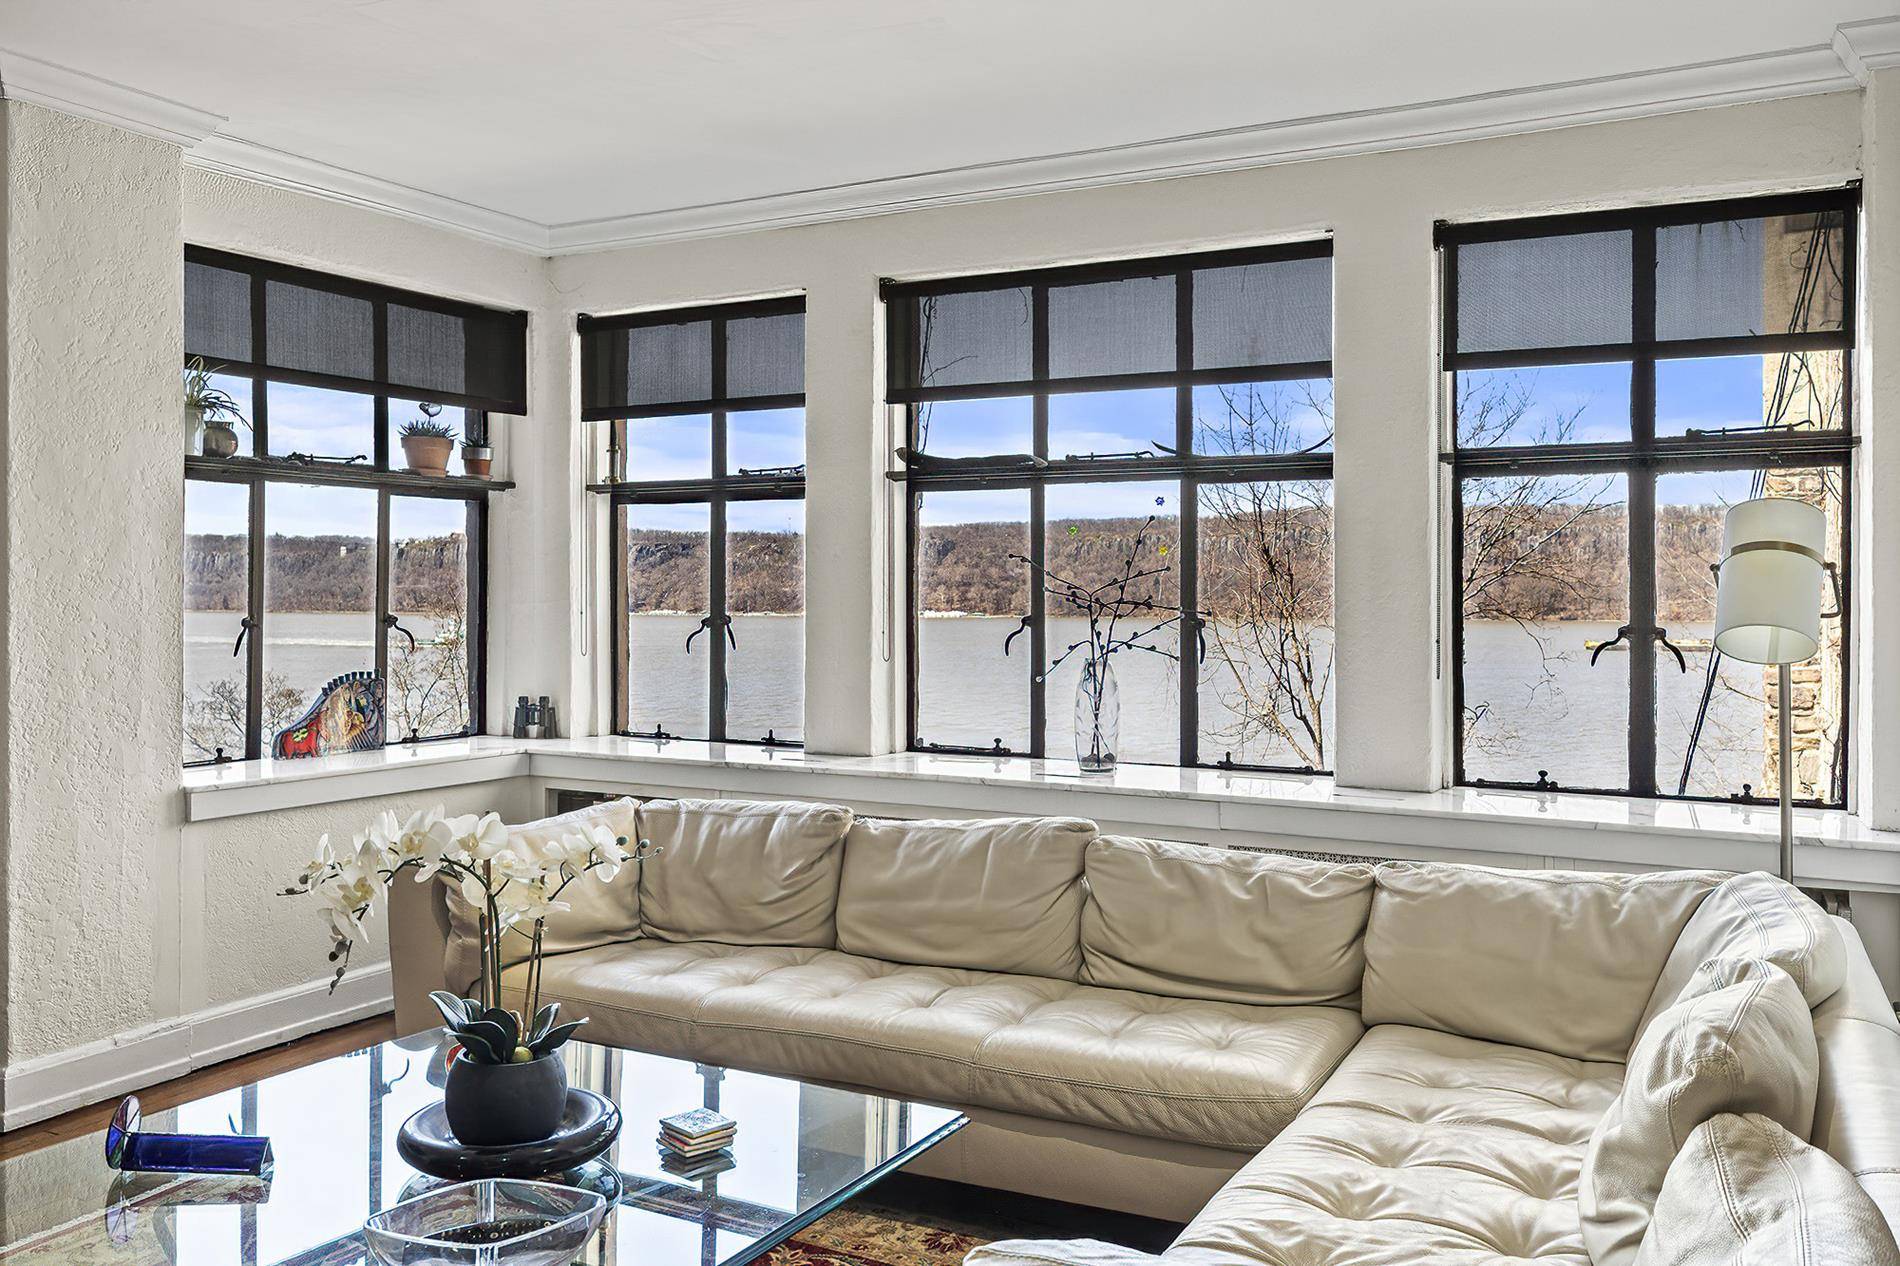 Villa Charlotte Bronte, a 17 unit apartment complex built in the 1920s, with intimate views of the Hudson River.